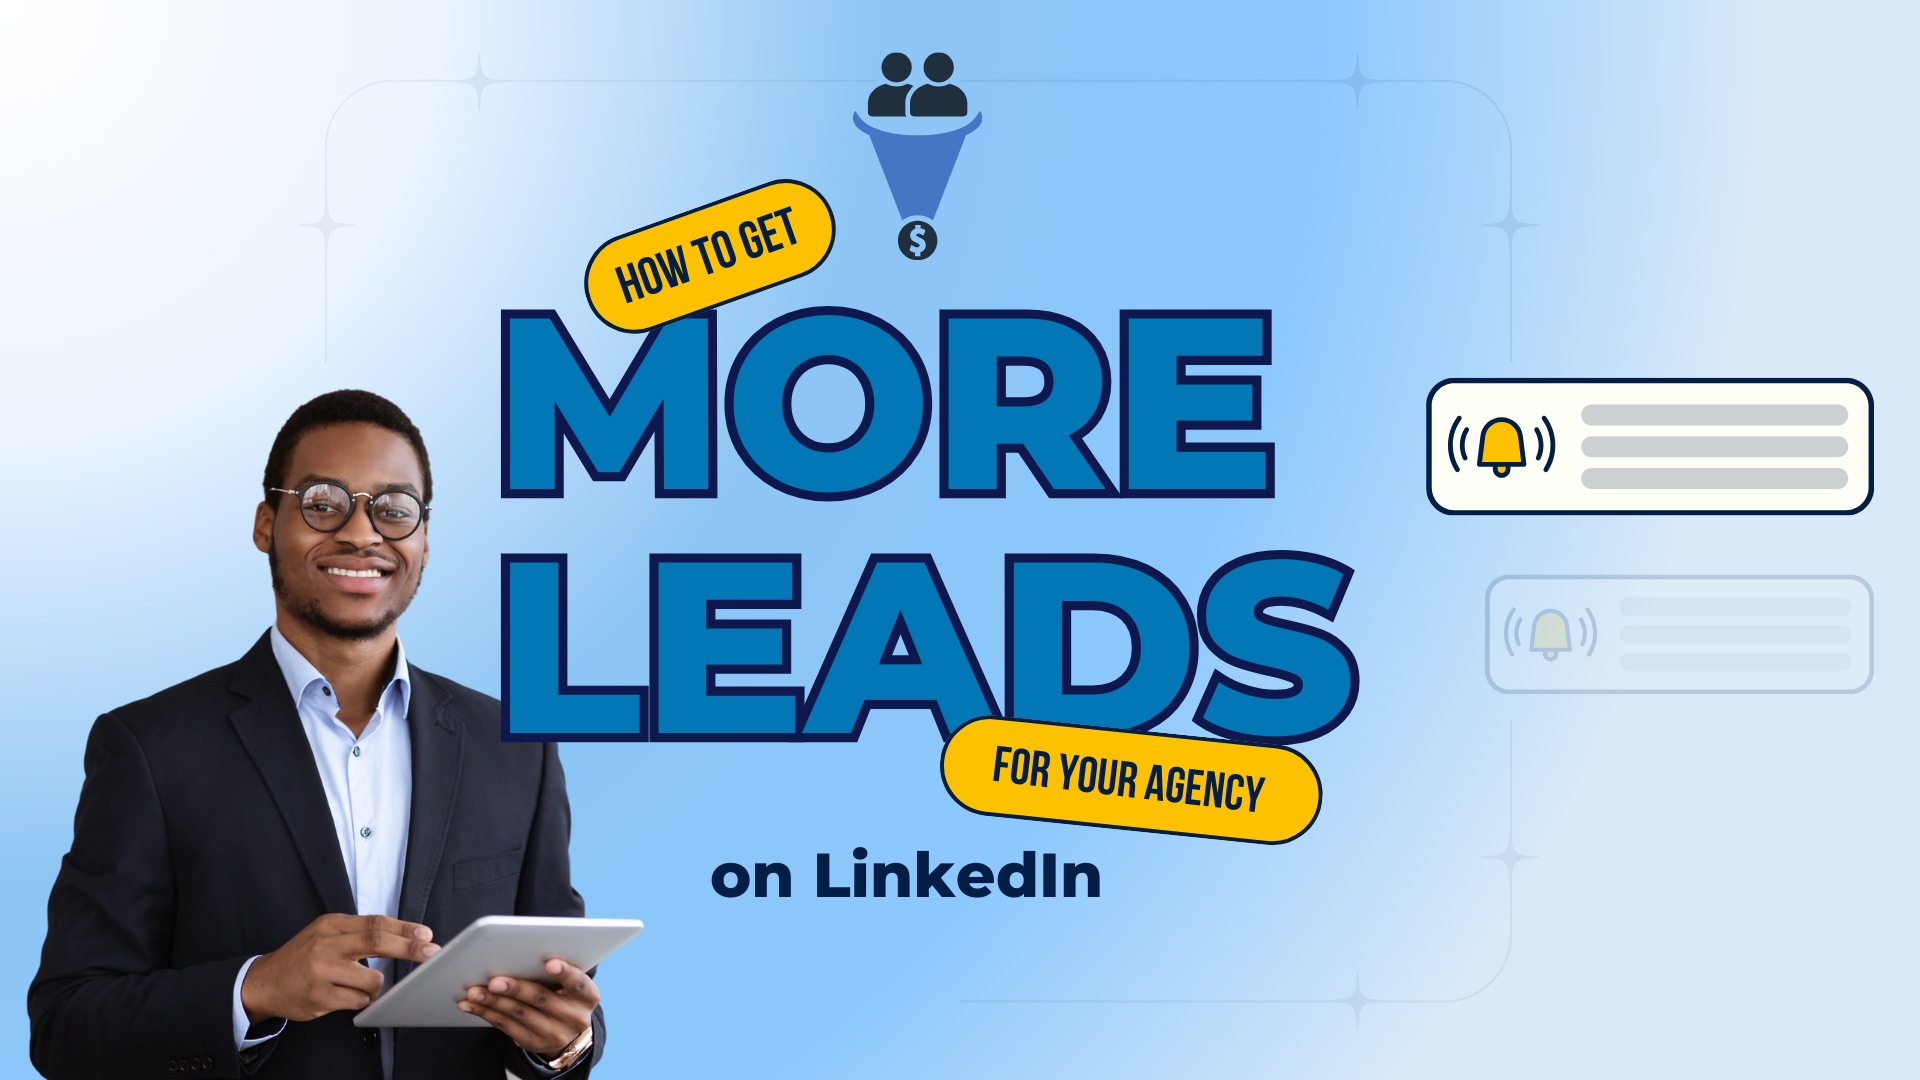 get more leads for your agency using linkedin